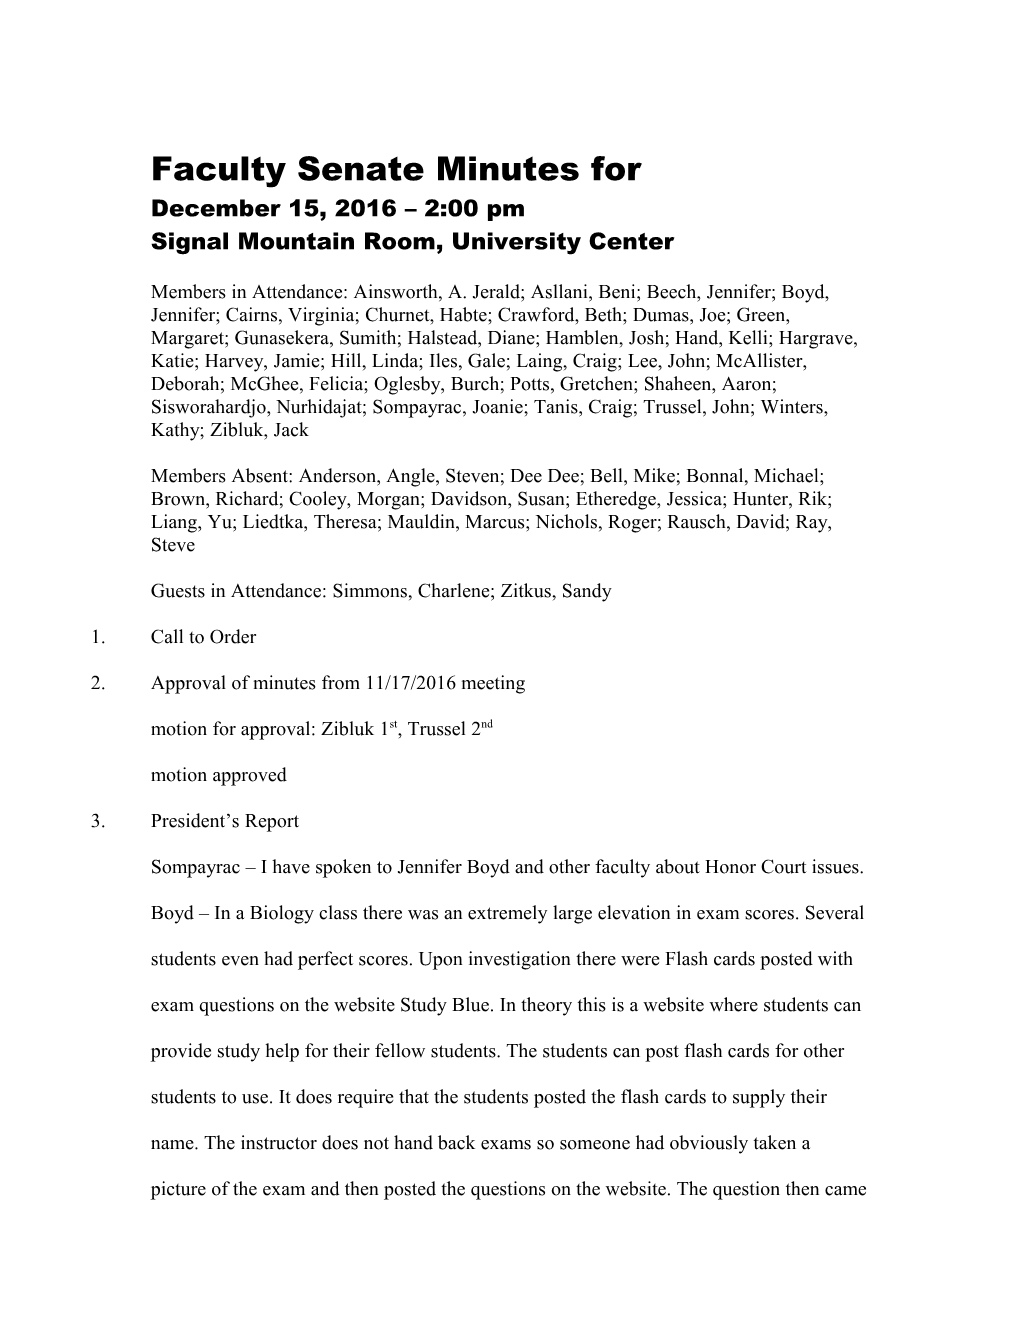 Faculty Senate Minutes For